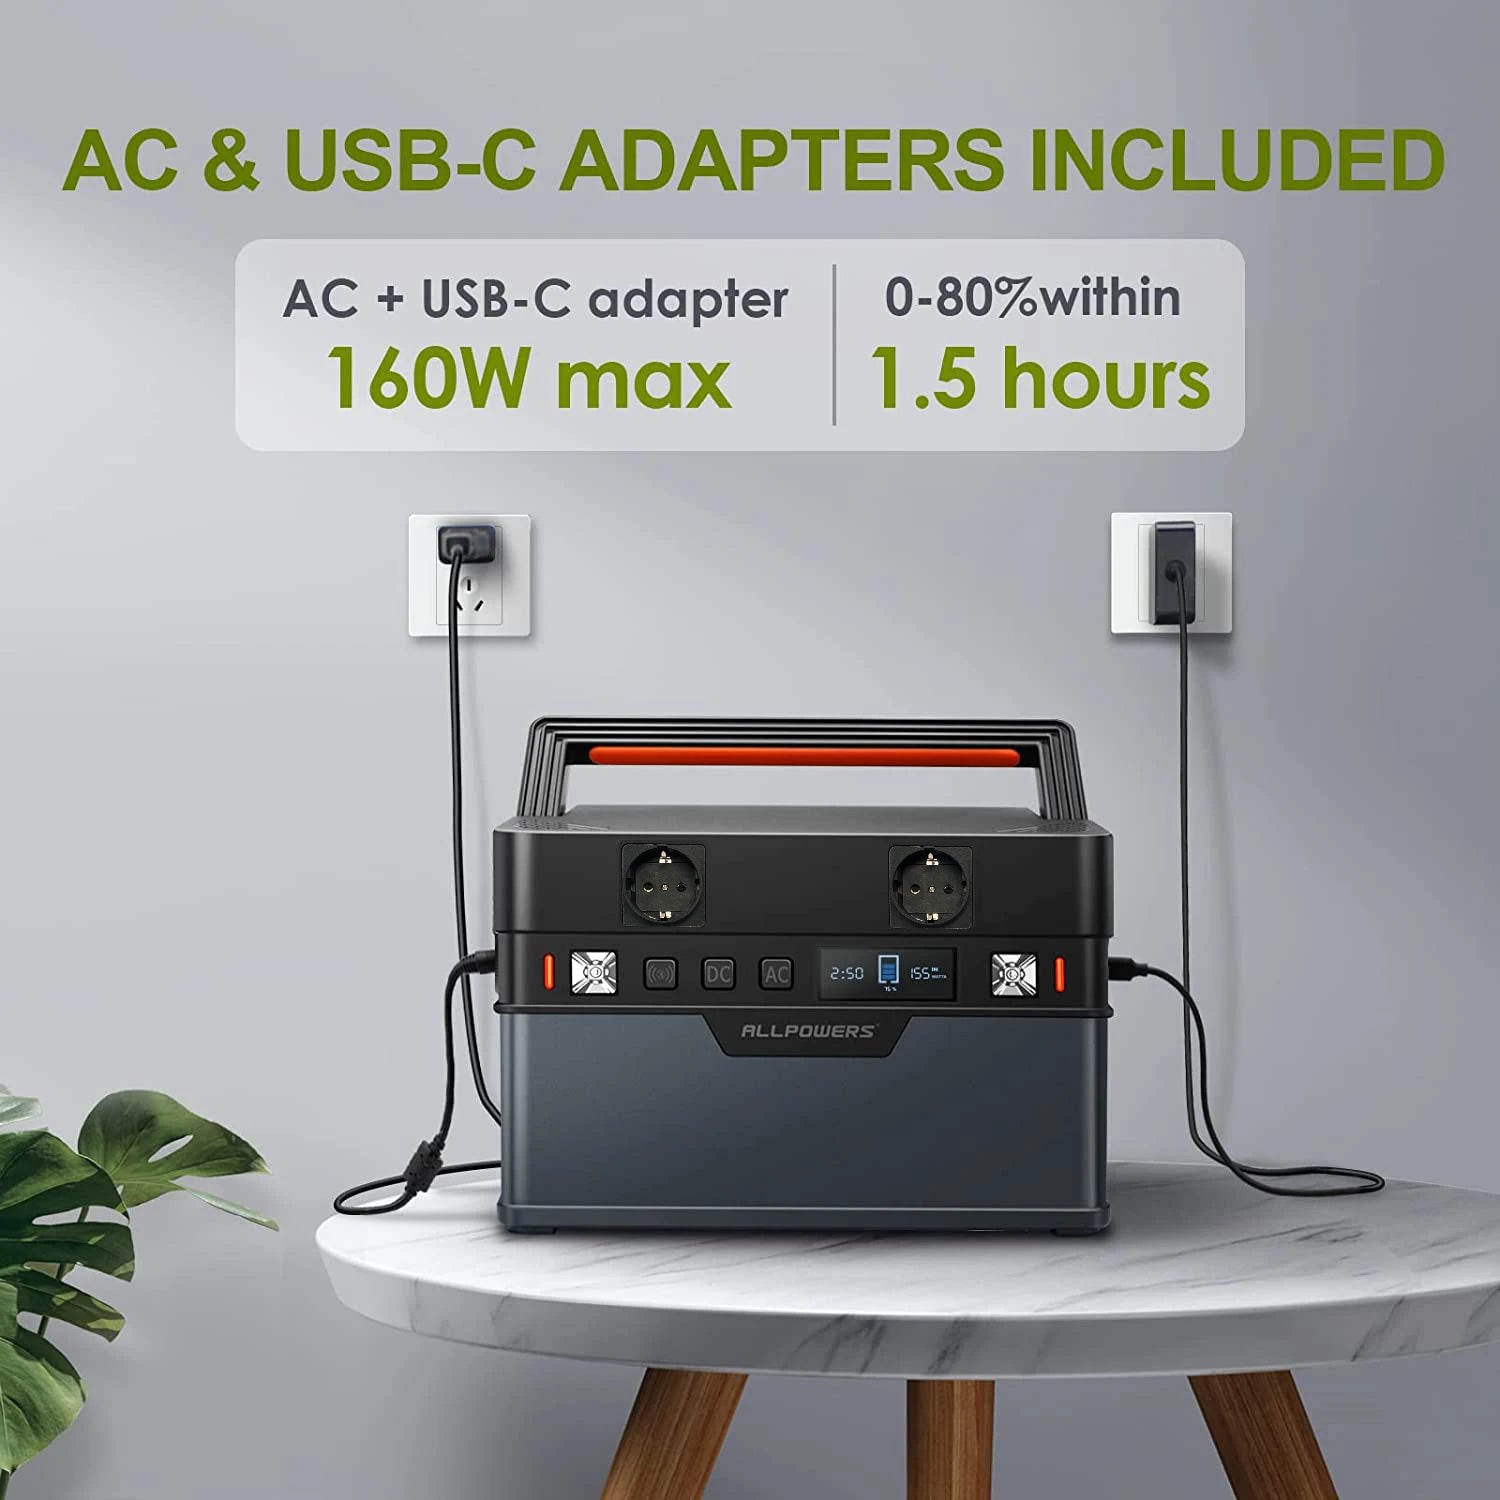 Solar-powered charger with AC and USB-C adapters, 800W max output, recharges in under 1.5 hours.